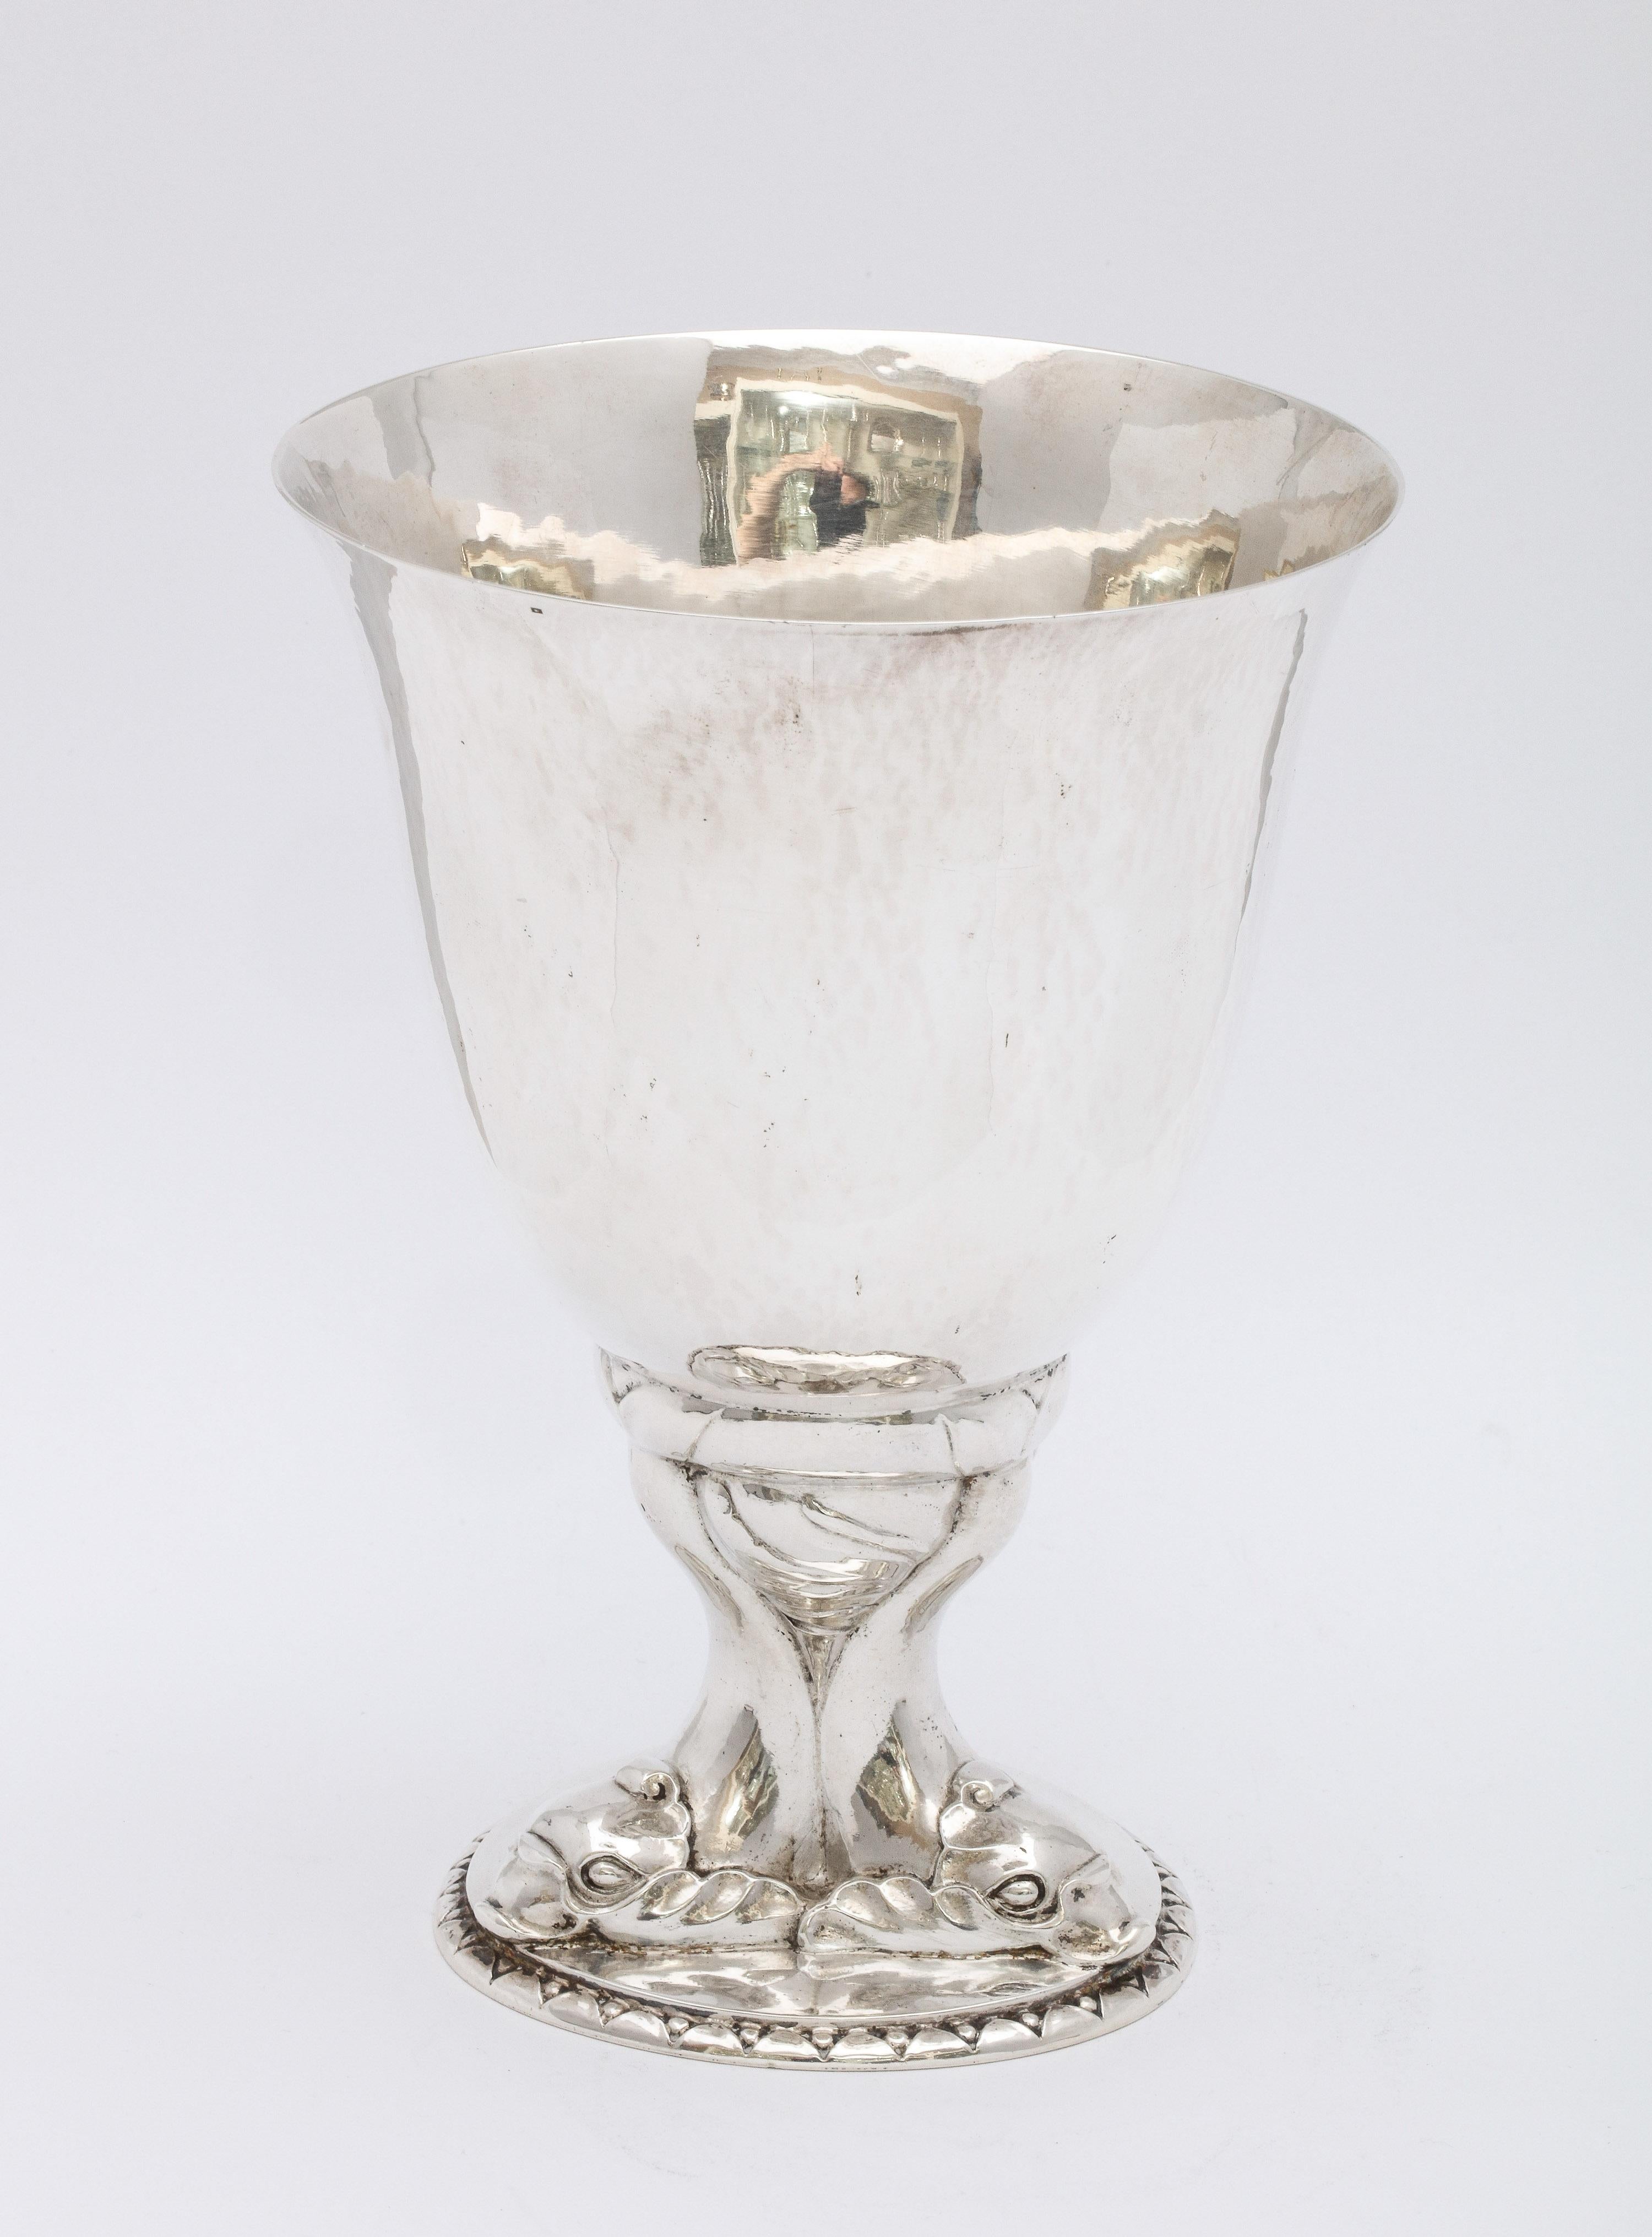 Art Deco, sterling silver vase, Denmark, year-hallmarked for 1919, Georg Jensen - maker. Ovoid shaped base is composed of three dolphins. Sterling silver is lightly hammered. Vase measures 6 1/4 inches high x almost 4 1/2 inches diameter across